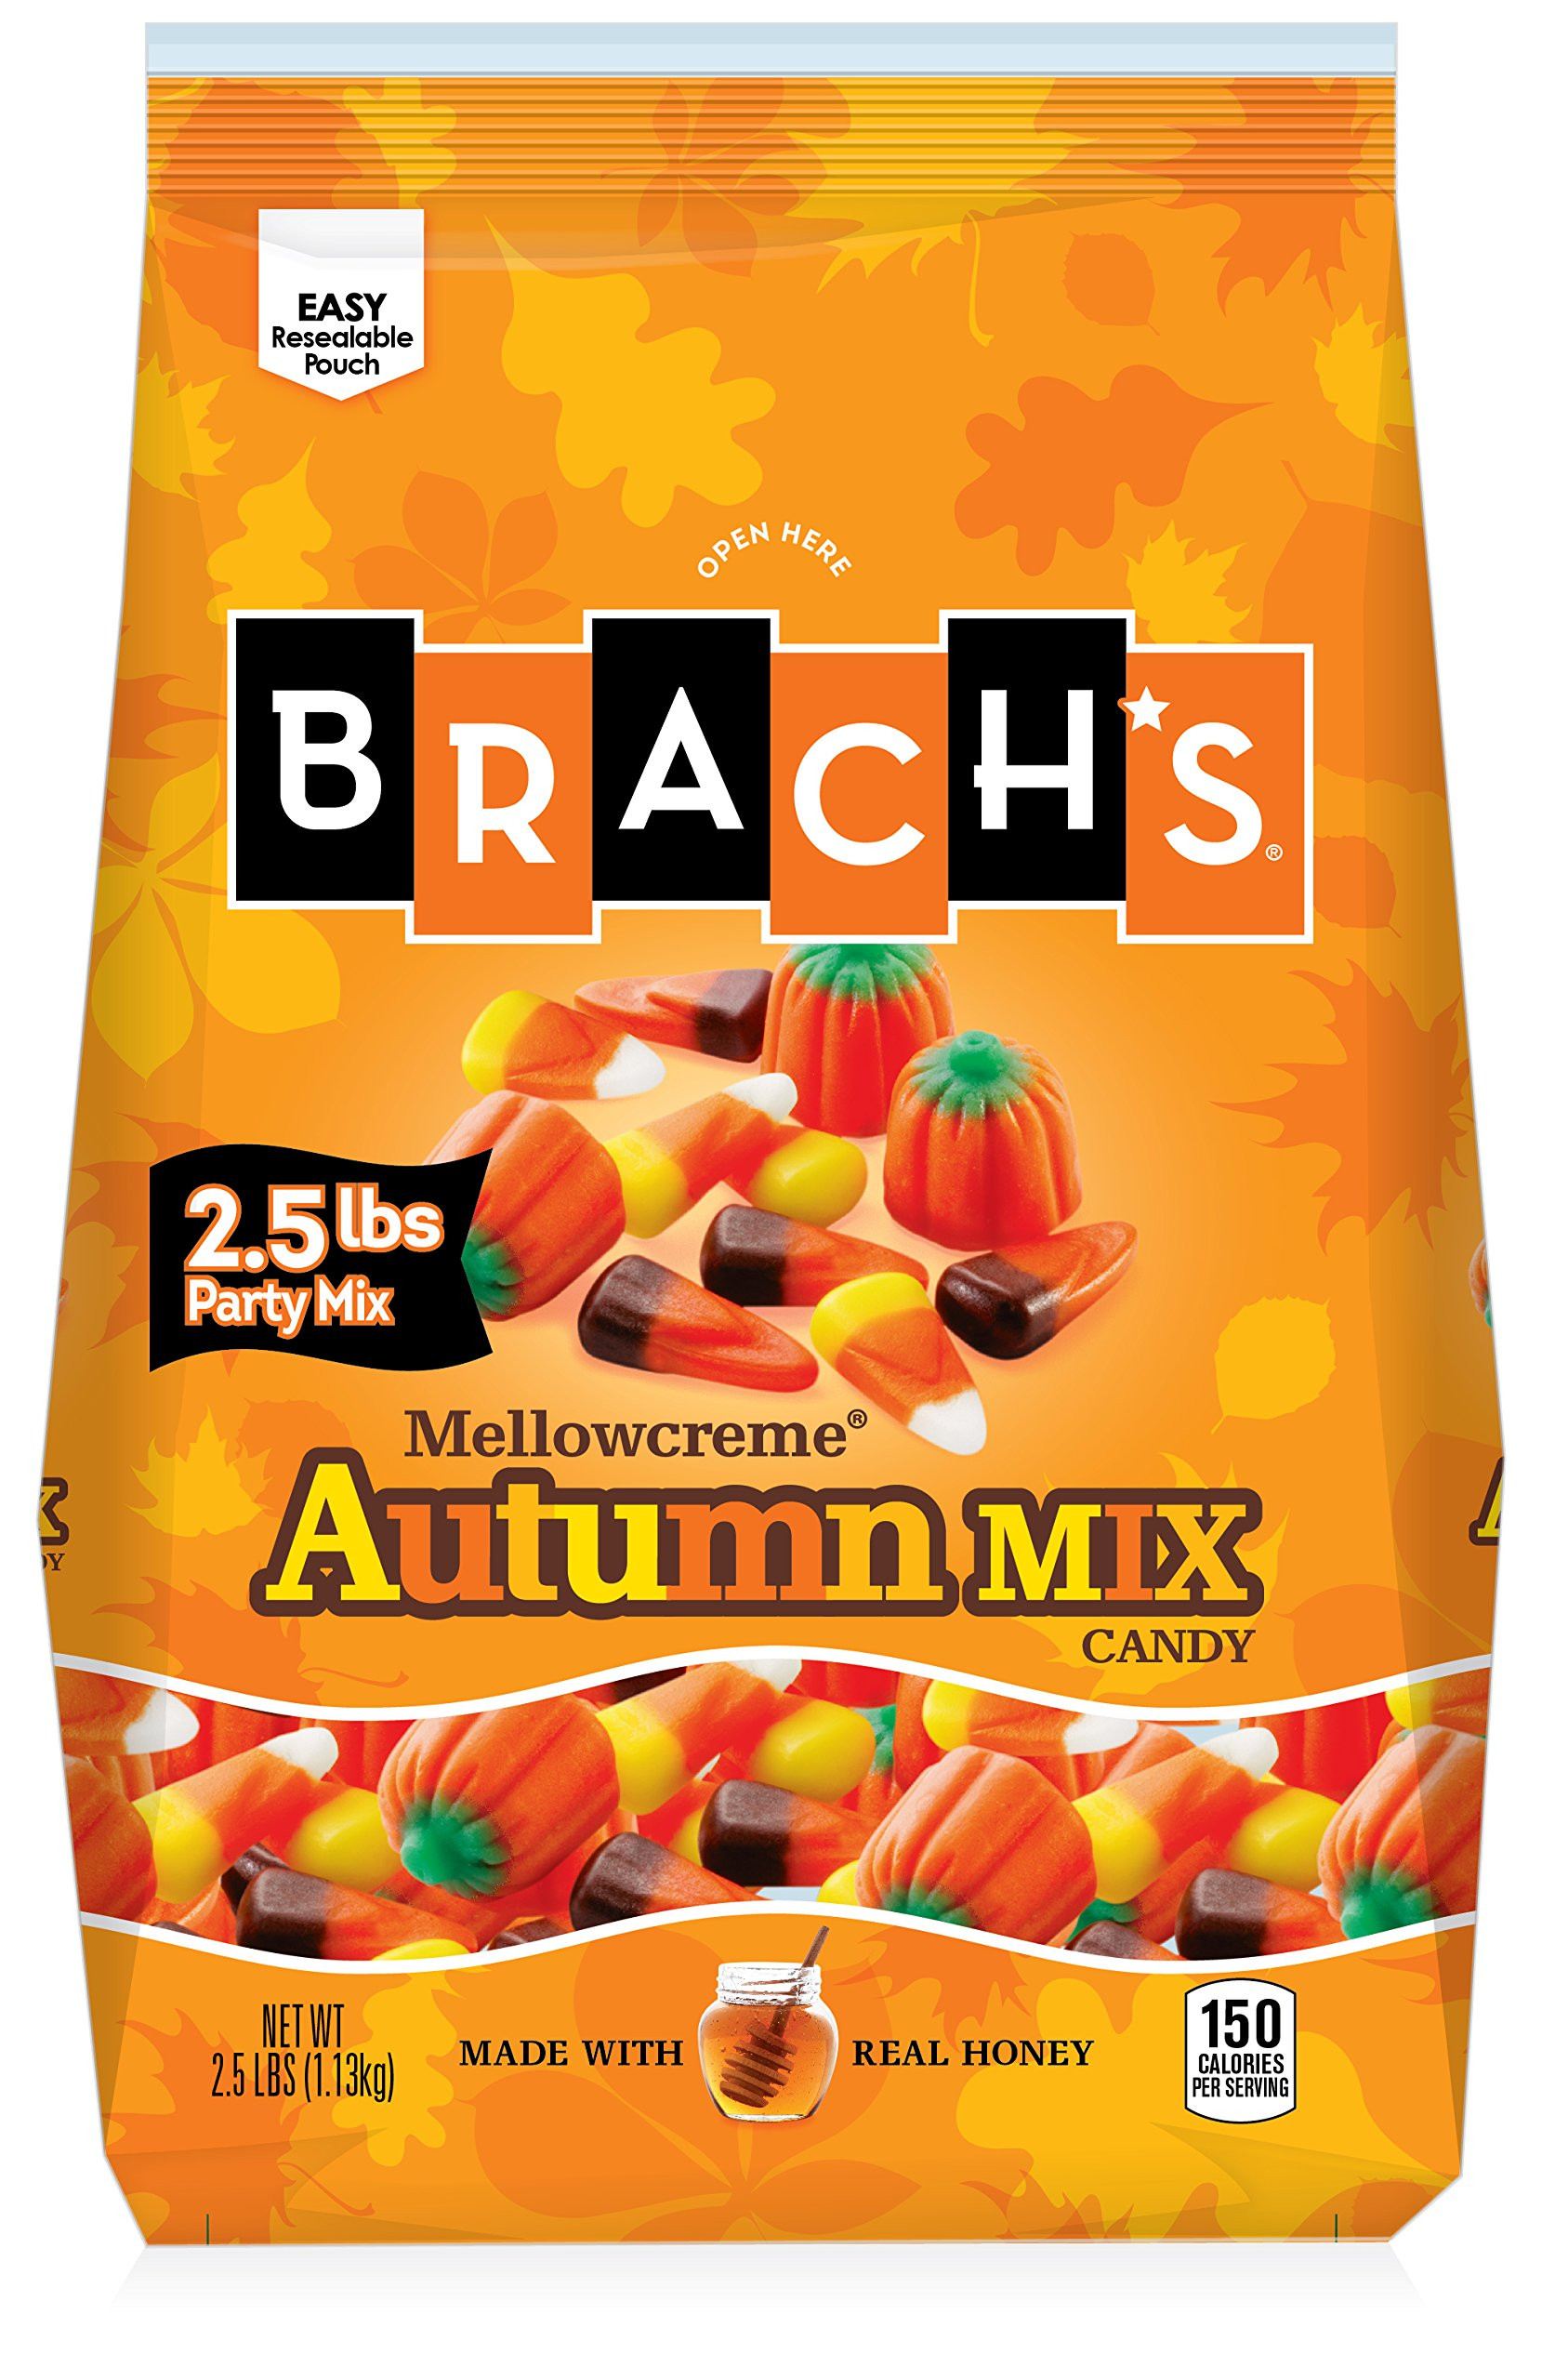 Mellowcreme Christmas Candy
 Amazon Brach s Candy Corn and Autumn Mix Duo 2